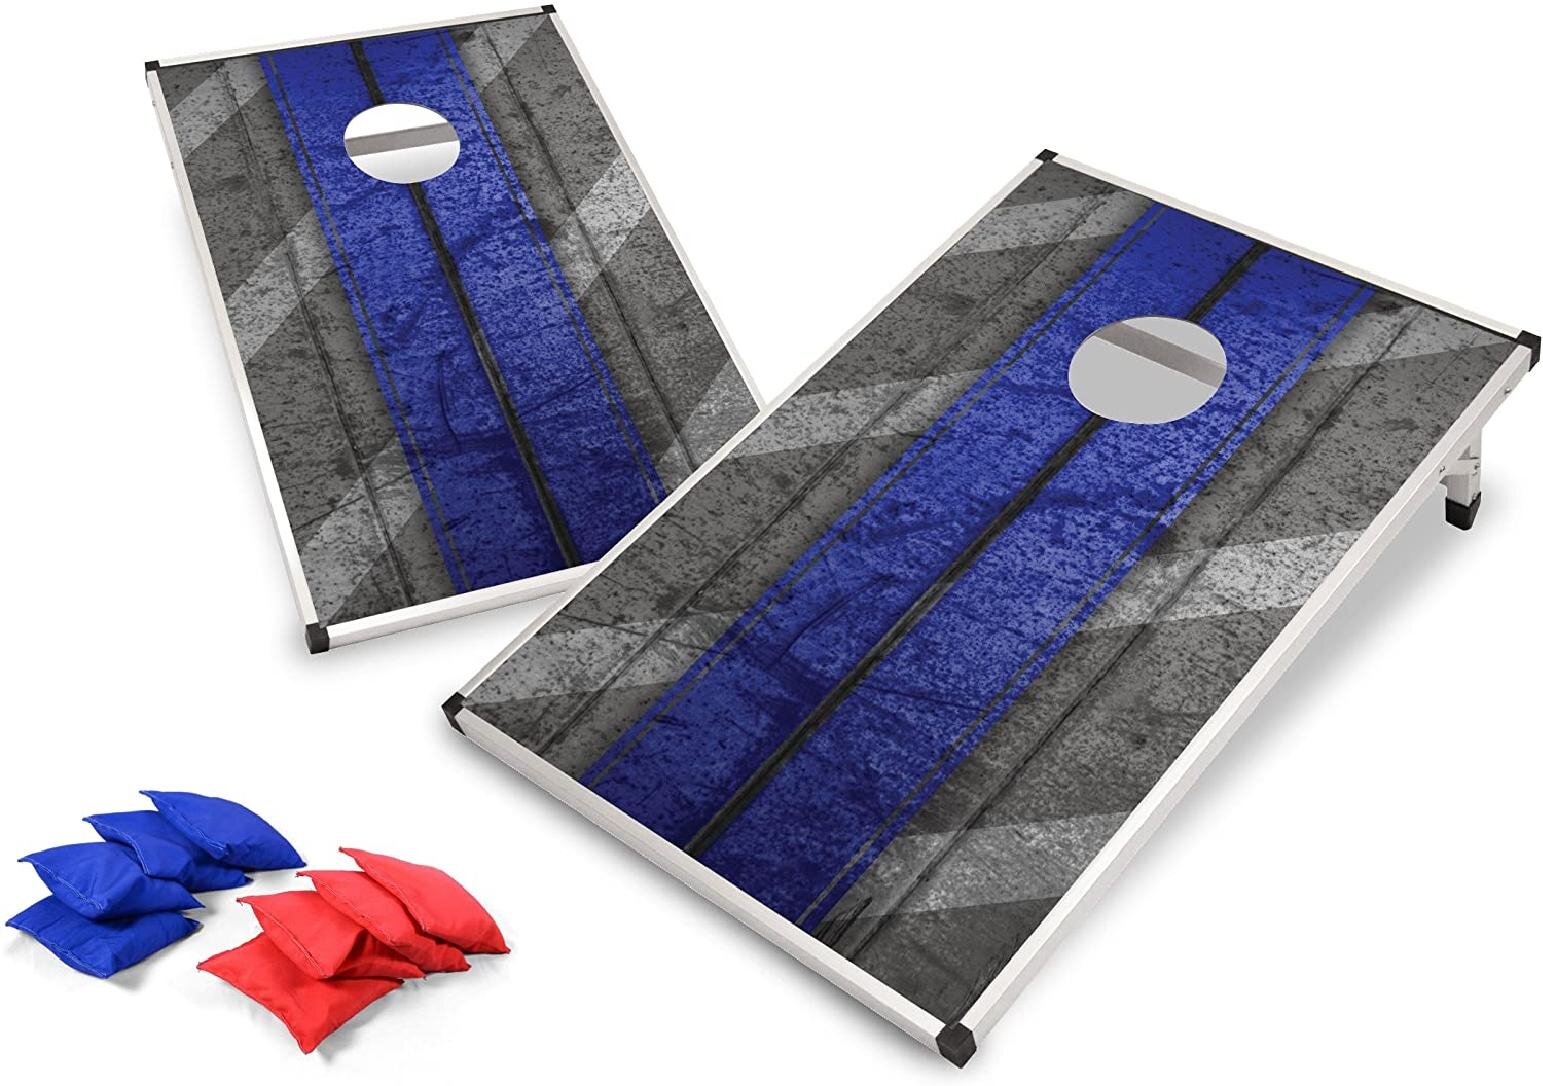 Foldable CornHole Toss Game Set Includes 2 Corn Hole Boards 8 Beans Bags for 